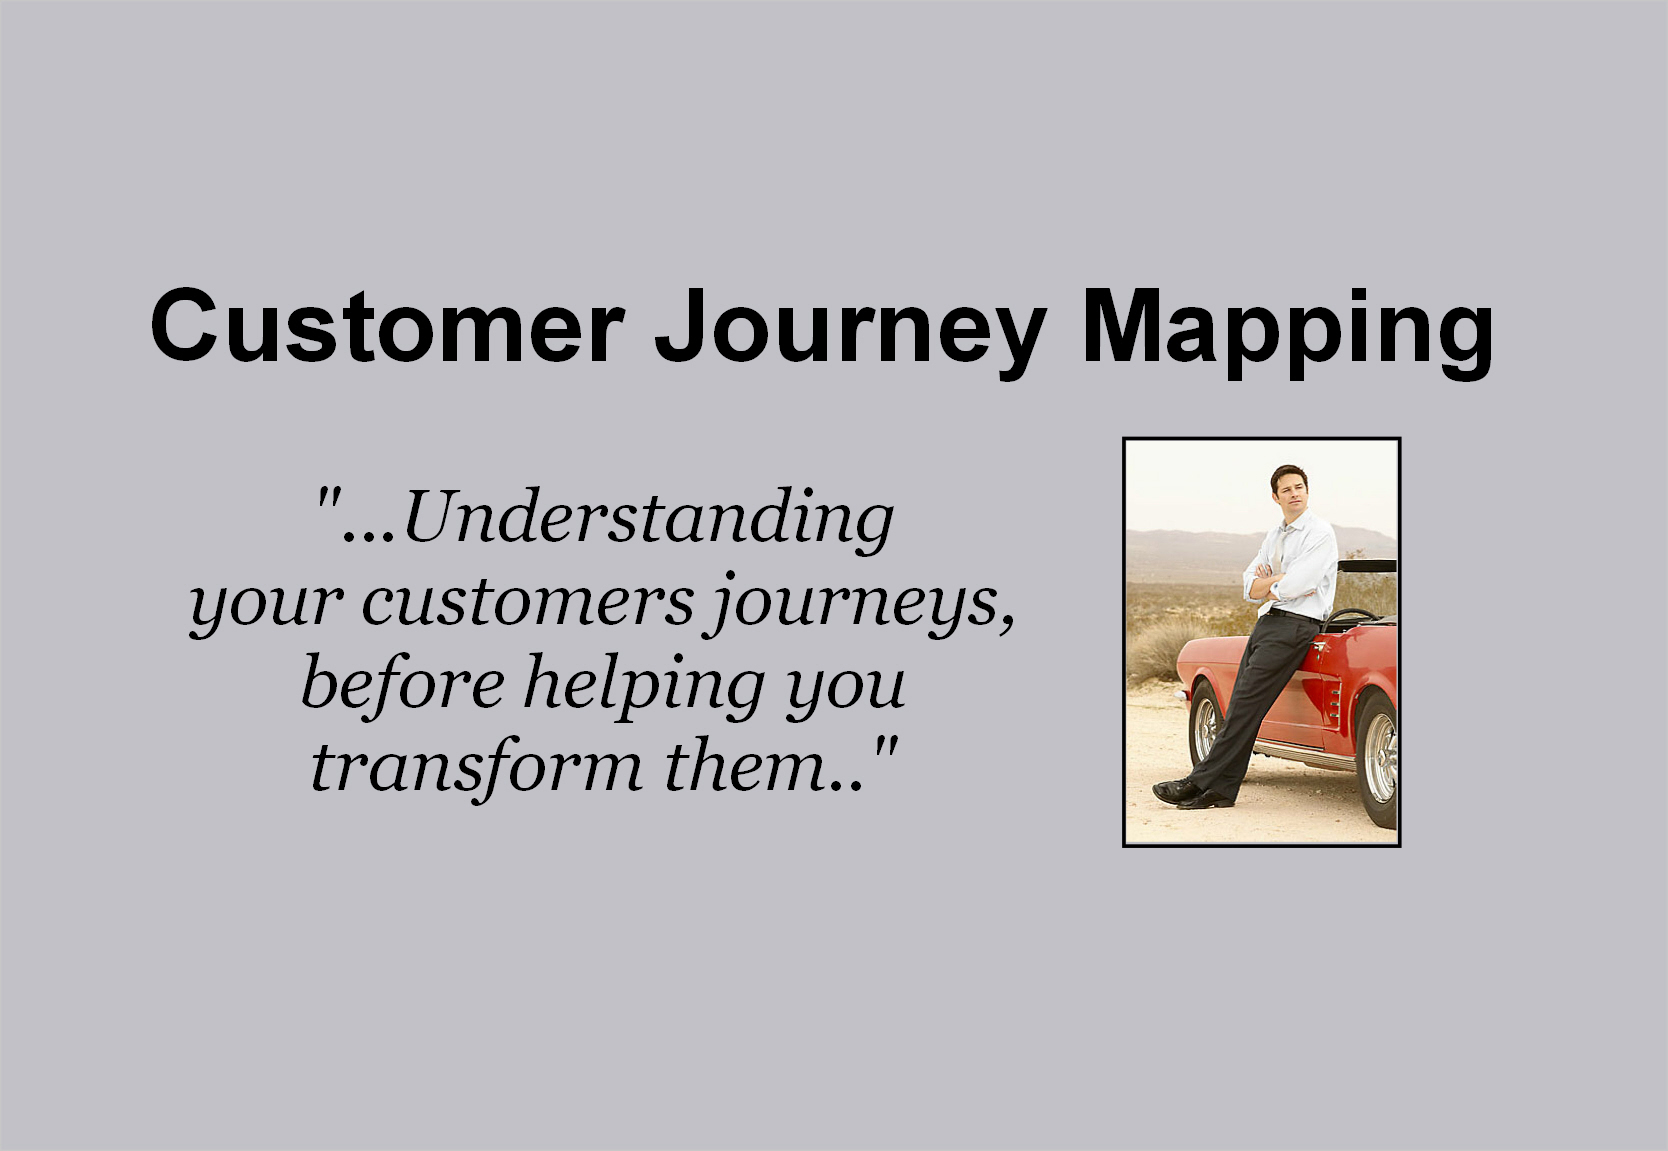 Customer Journey Mapping 2